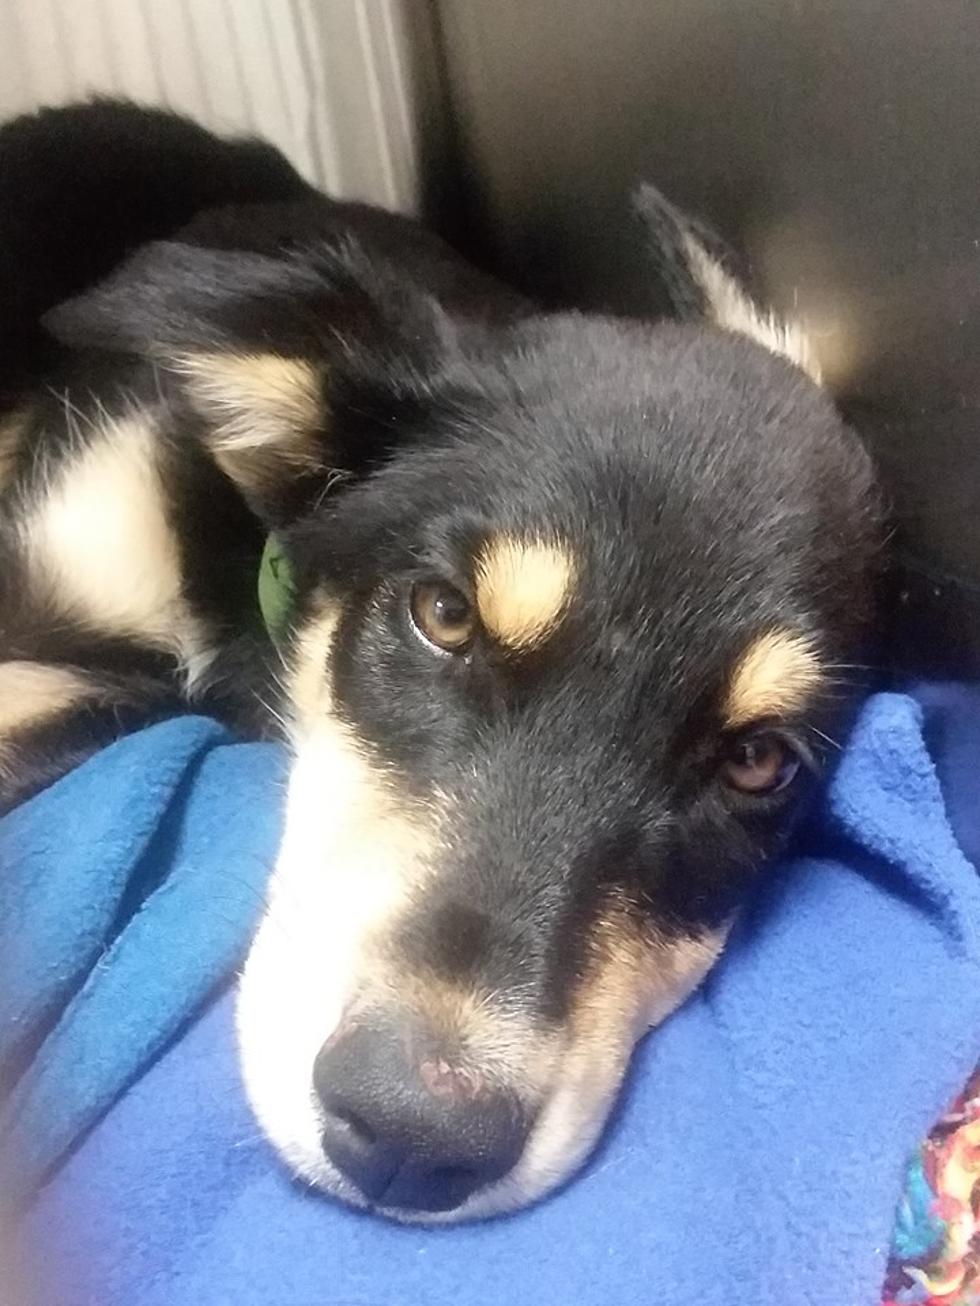 Puppy Shot In Jerome Needs Special Family To Help Her Heal